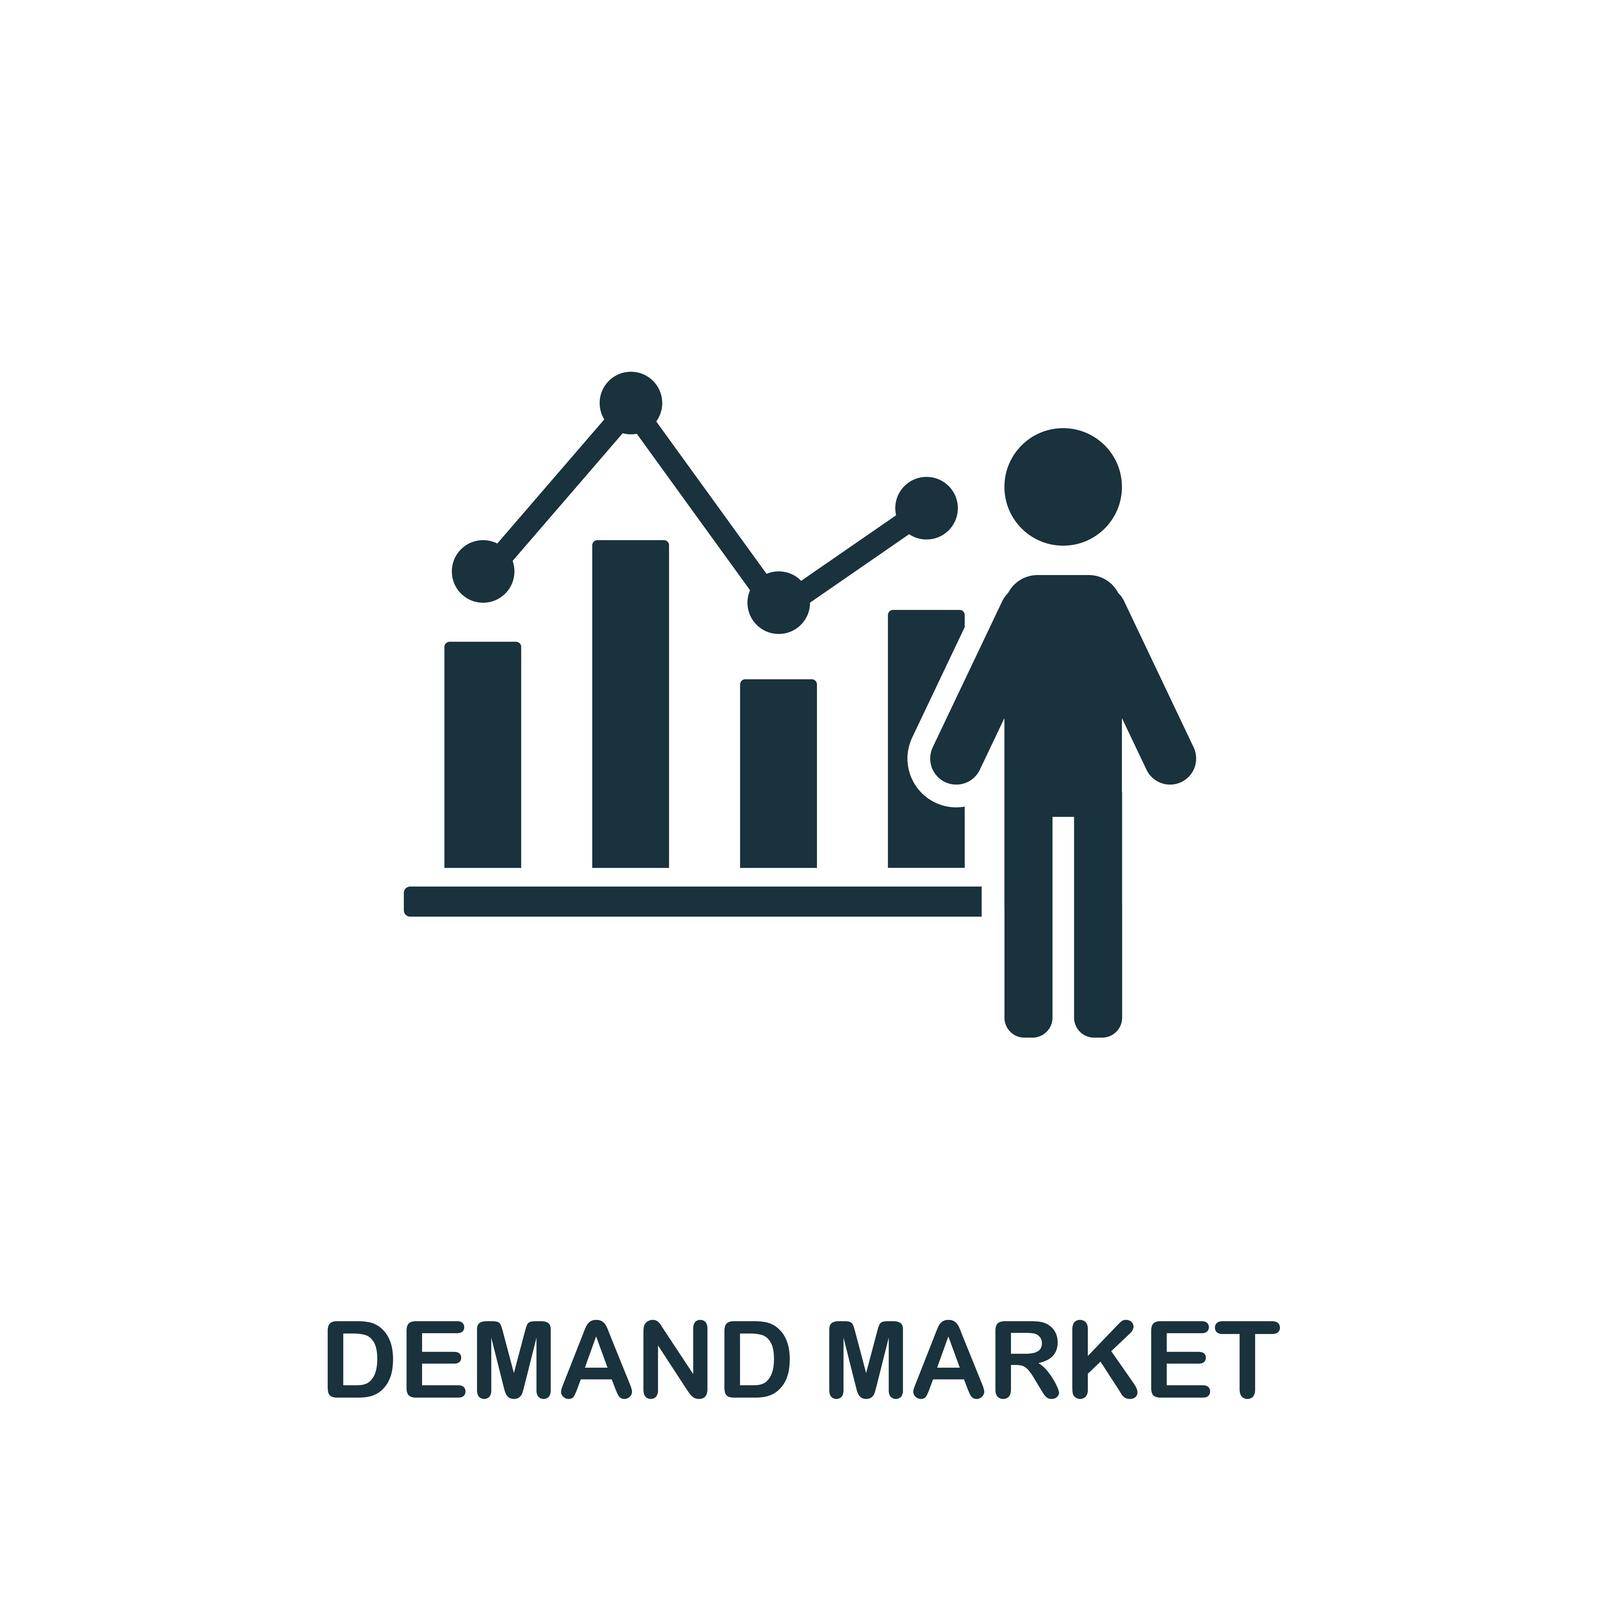 Demand Market icon. Monochrome sign from market economy collection. Creative Demand Market icon illustration for web design, infographics and more by simakovavector